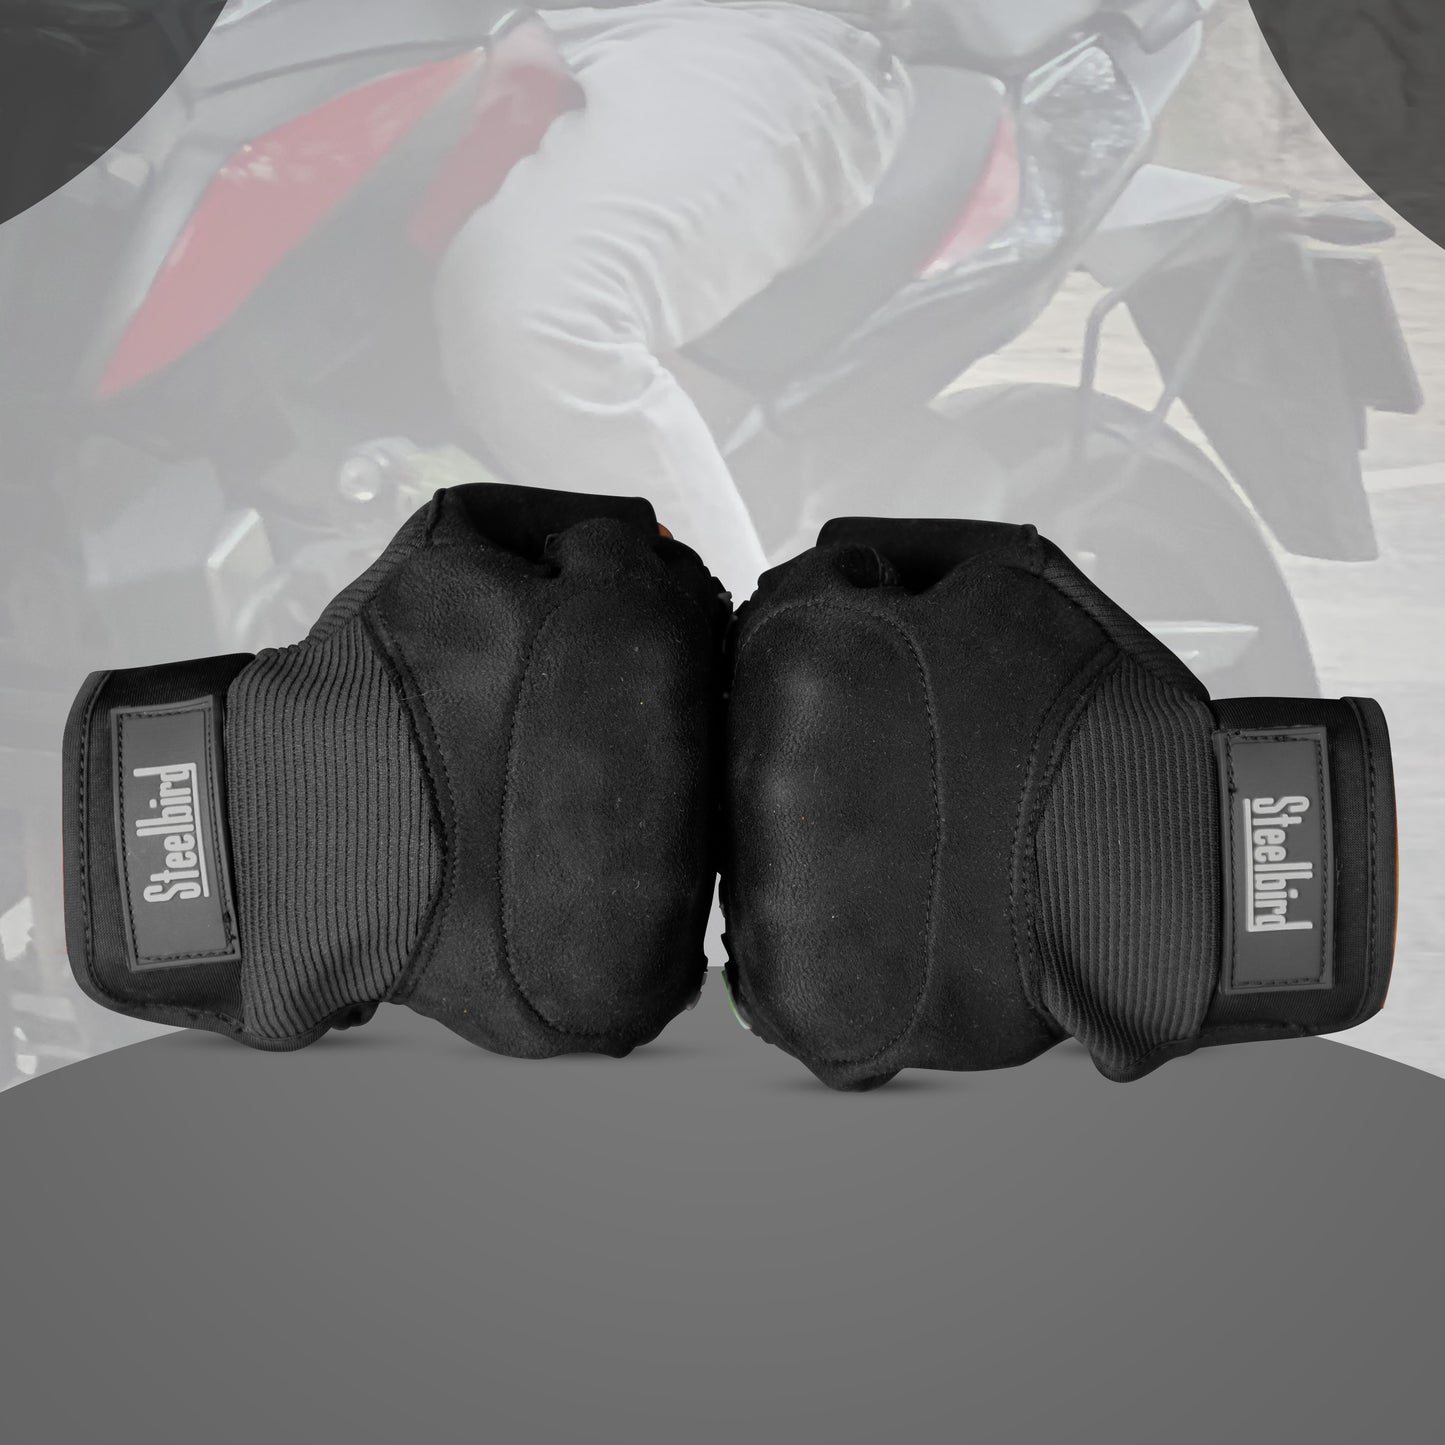 Steelbird Experience 1.0 Reflective Half Finger Bike Riding Gloves, Protective Off-Road Motorbike Racing (Black)